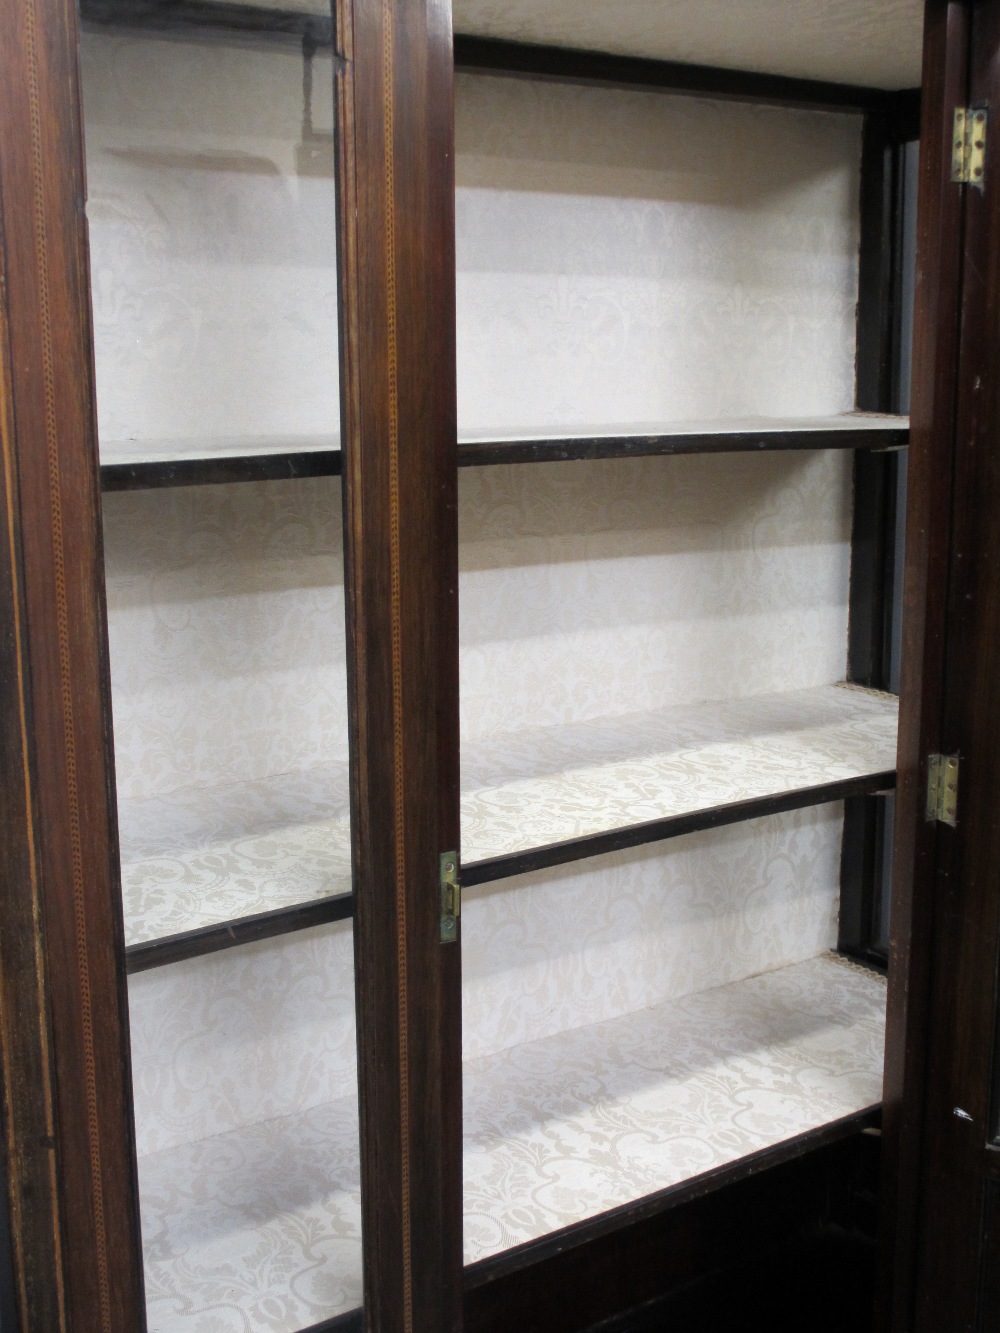 MAHOGANY INLAID BREAKFRONT DISPLAY CABINET, single door, with floral upholstered shelves and back, - Image 4 of 5